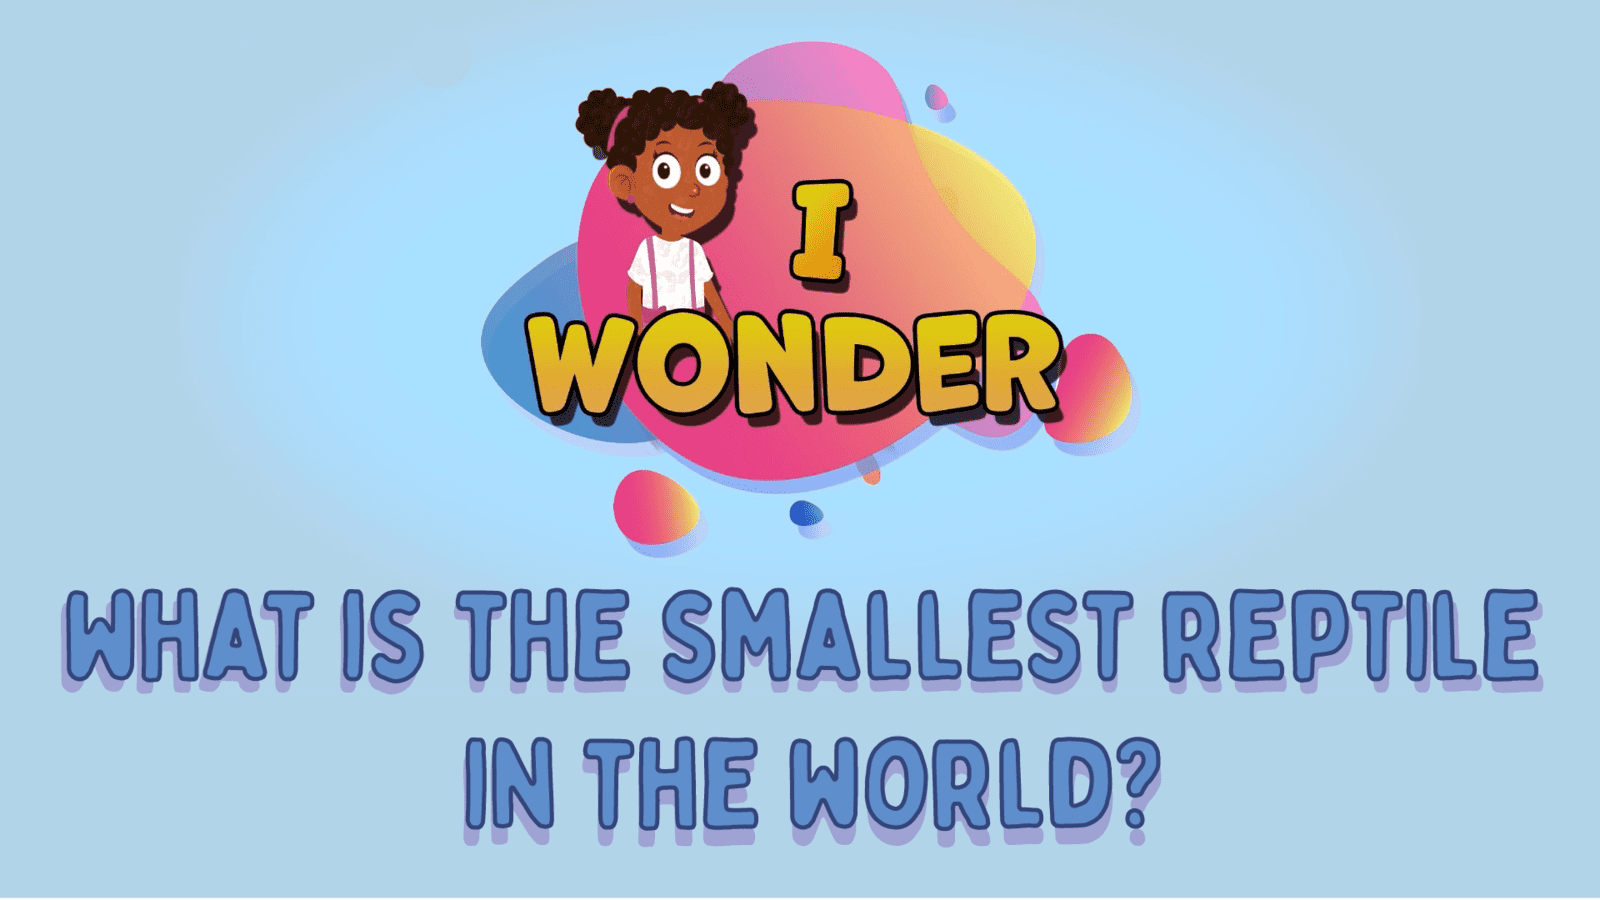 What Is The Smallest Reptile In The World?